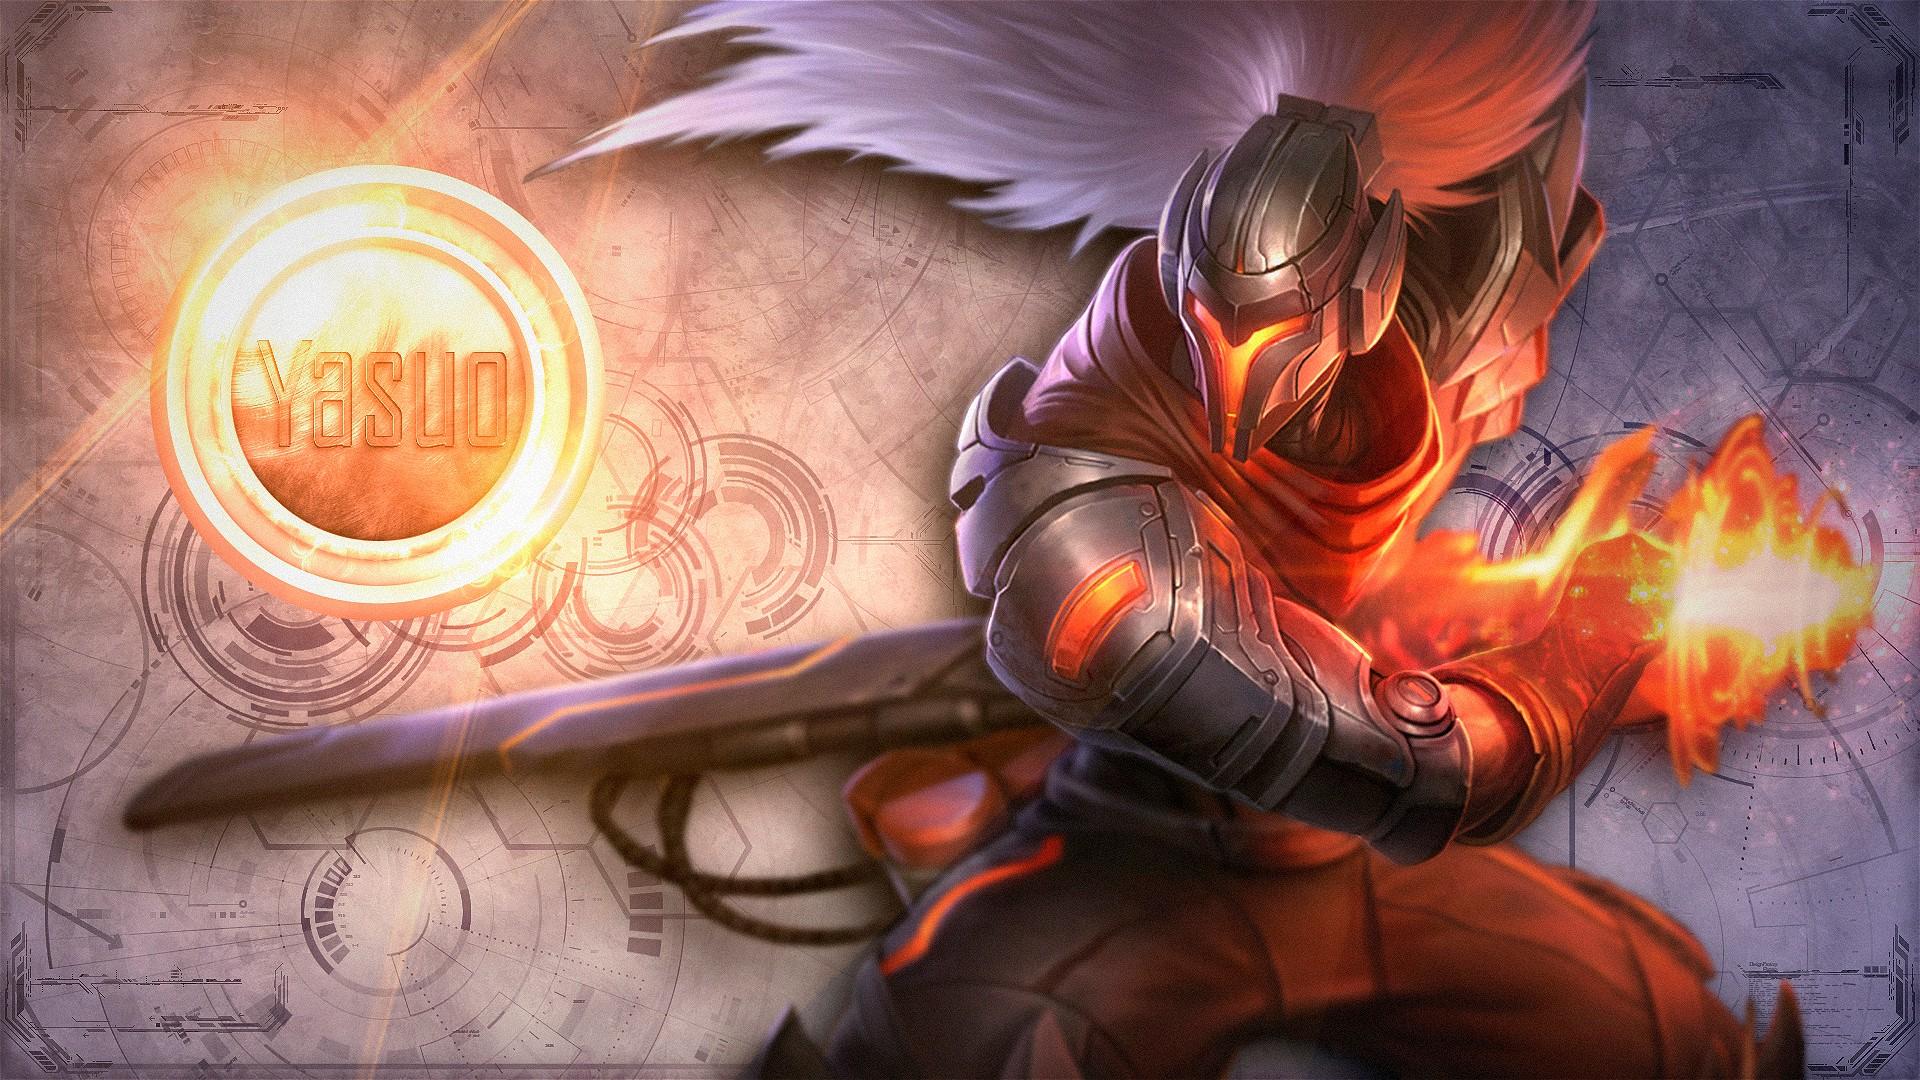 Project Yasuo Wallpapers - Top Free Project Yasuo Backgrounds ...